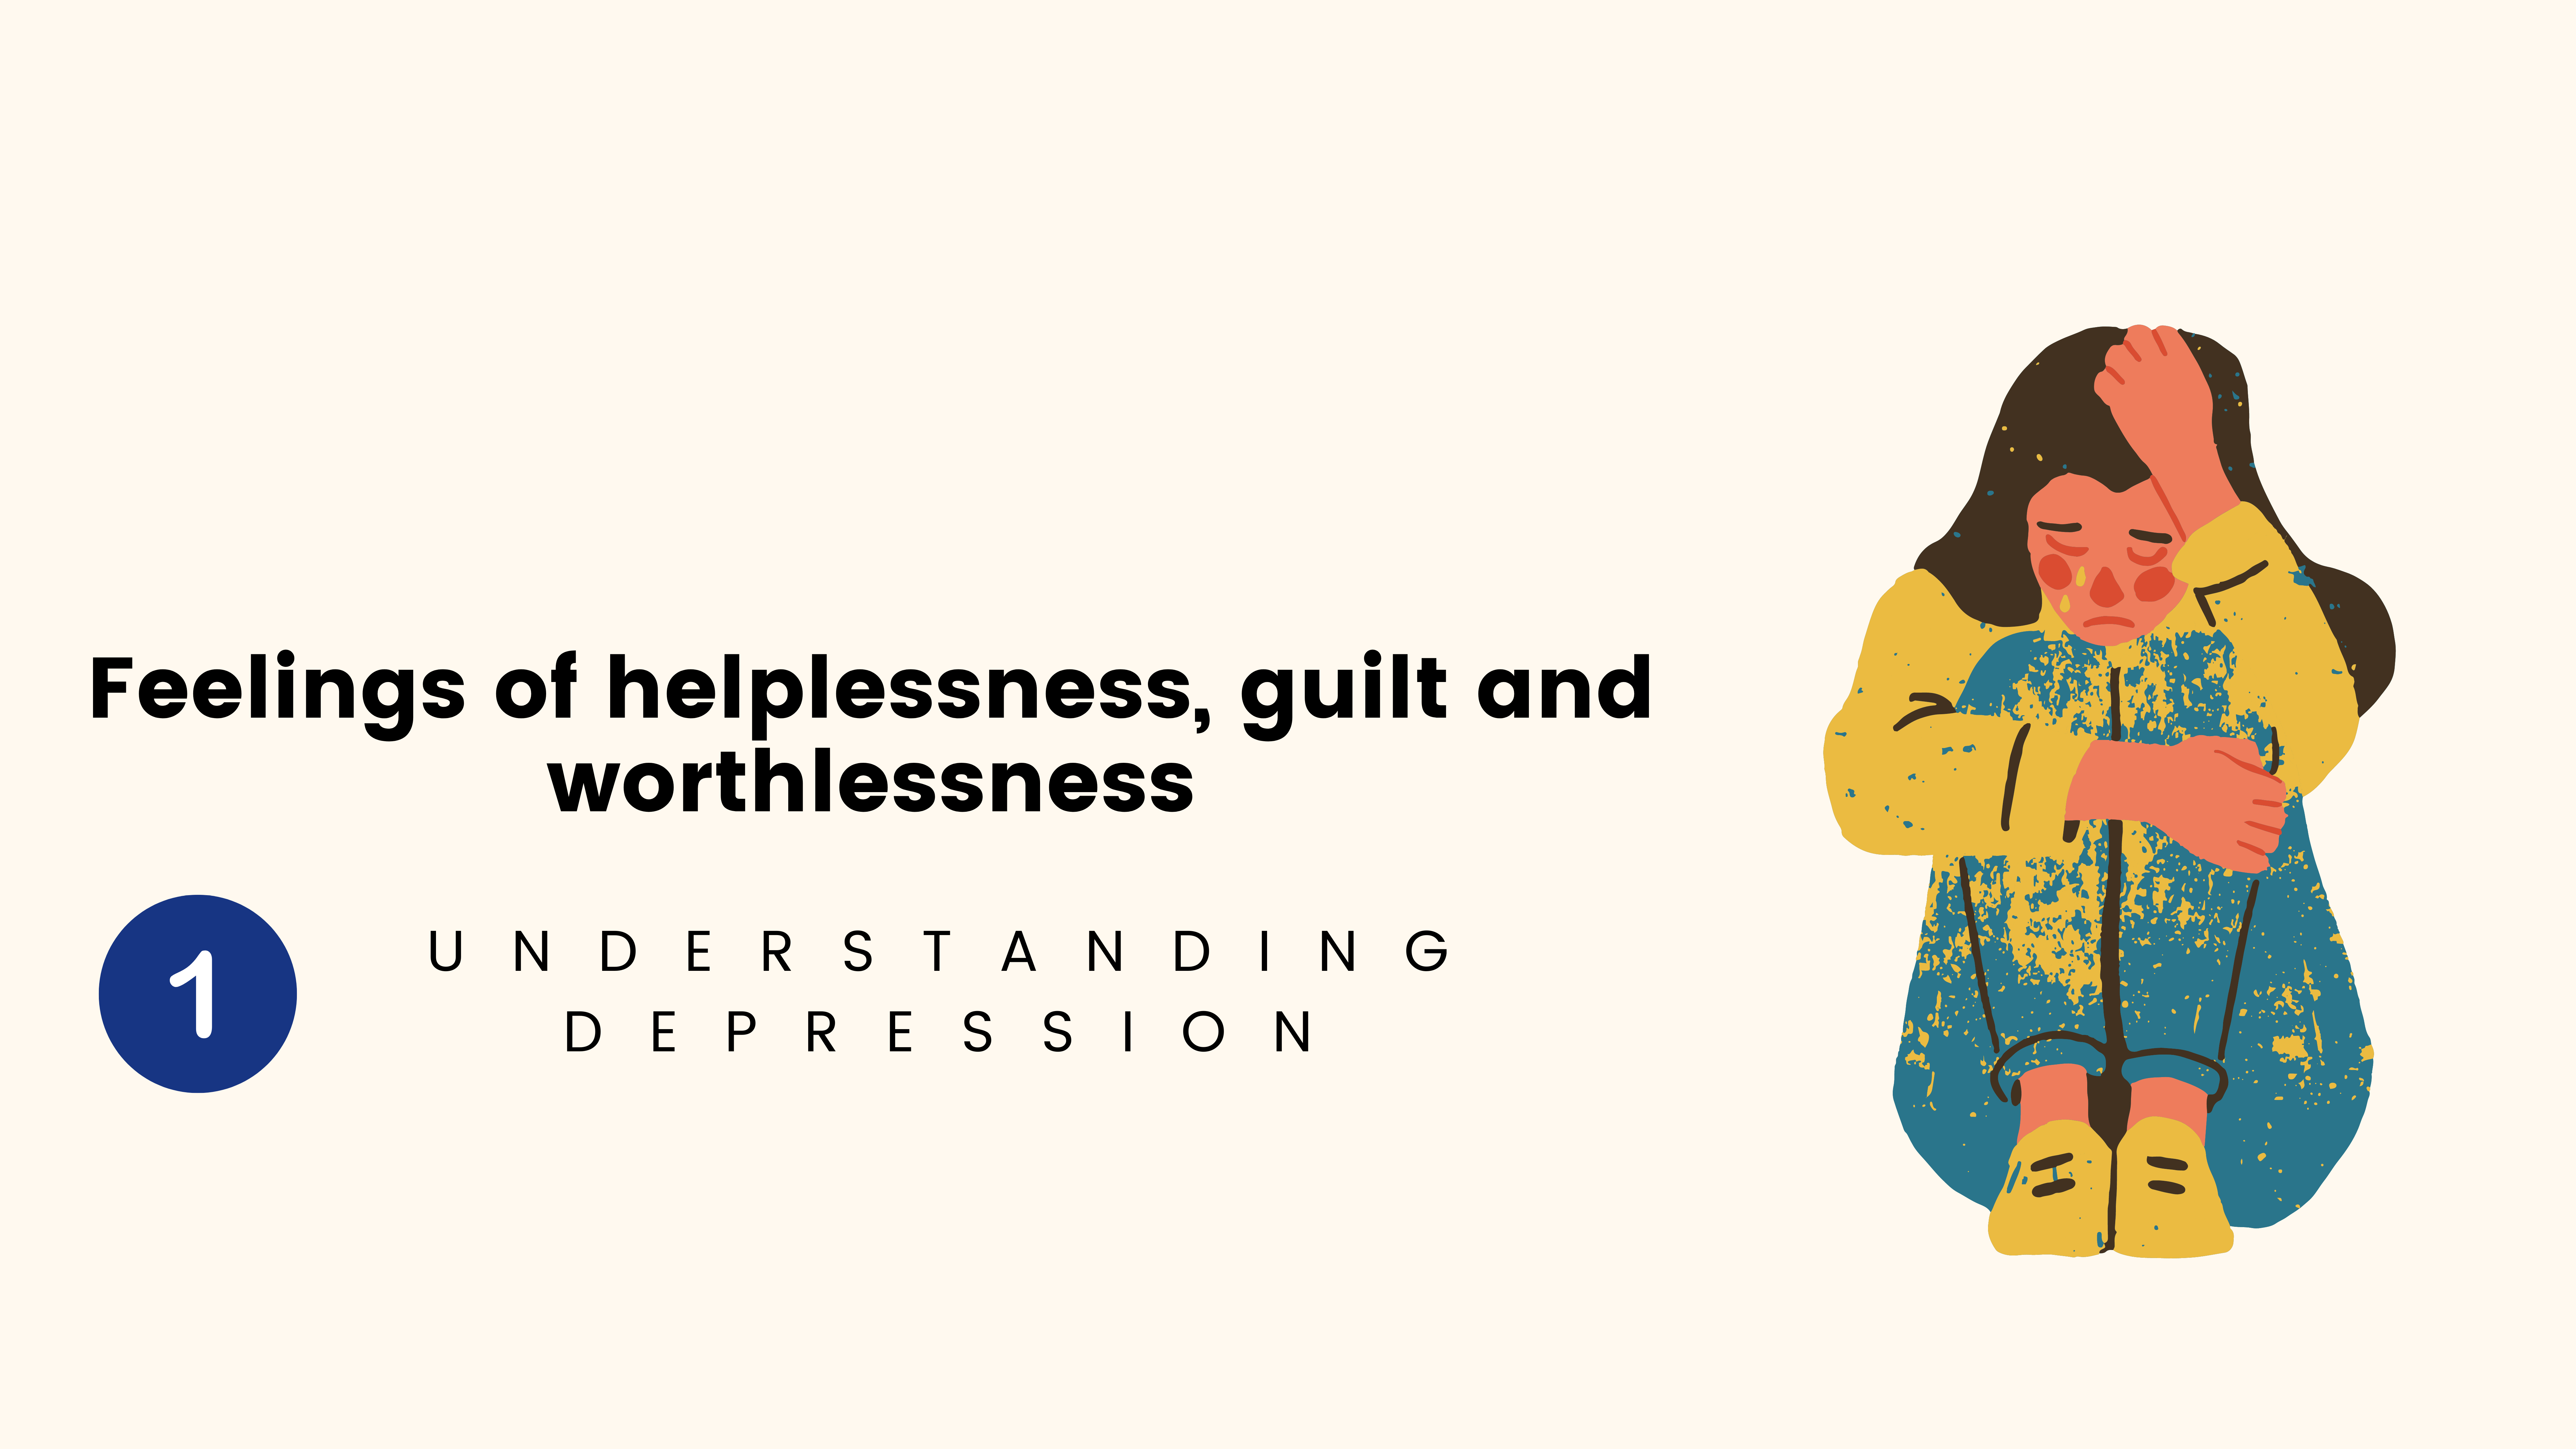 Image shows feelings of helplessness, guilt and worthlessness in depression